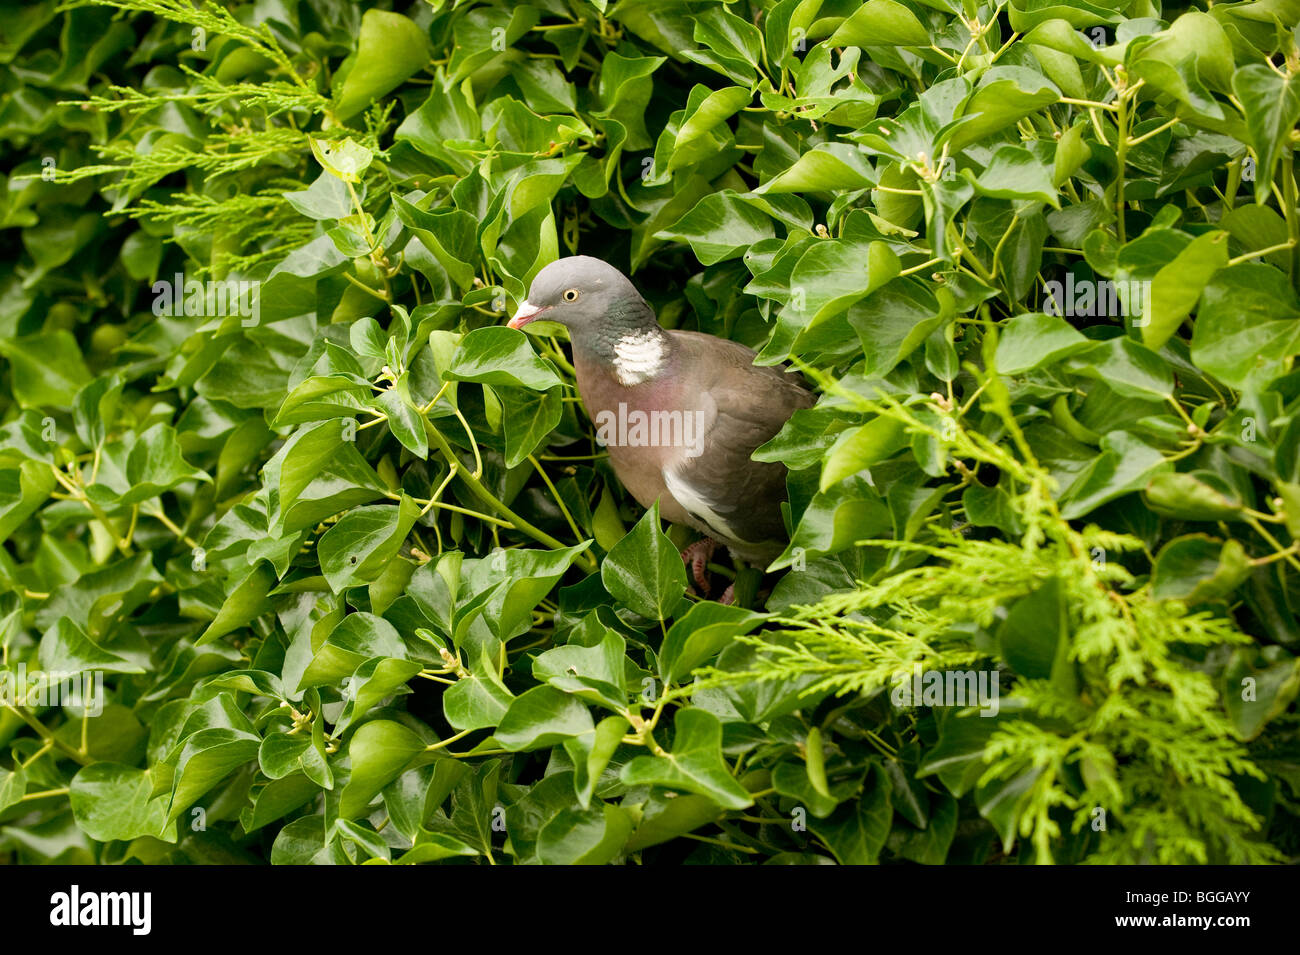 Wood pigeon emerging from nest in ivy hedge. Stock Photo